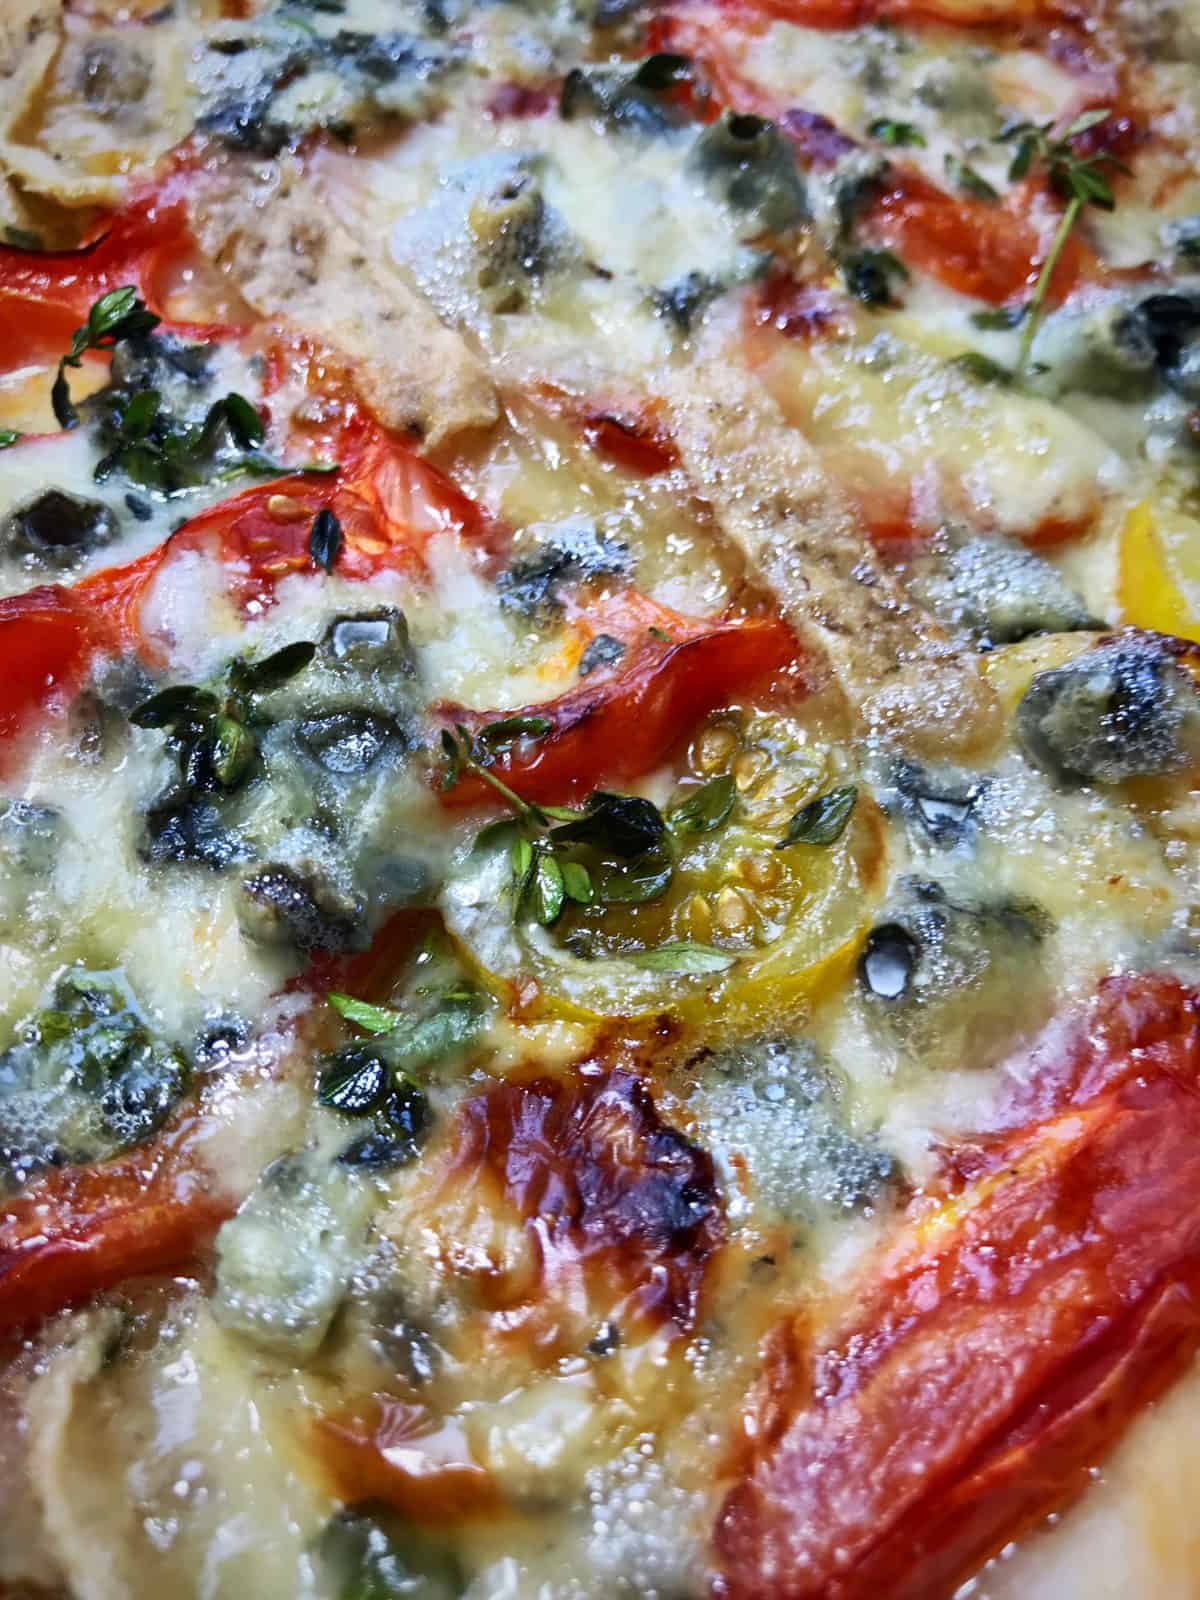 Tomato and Blue Cheese Tart